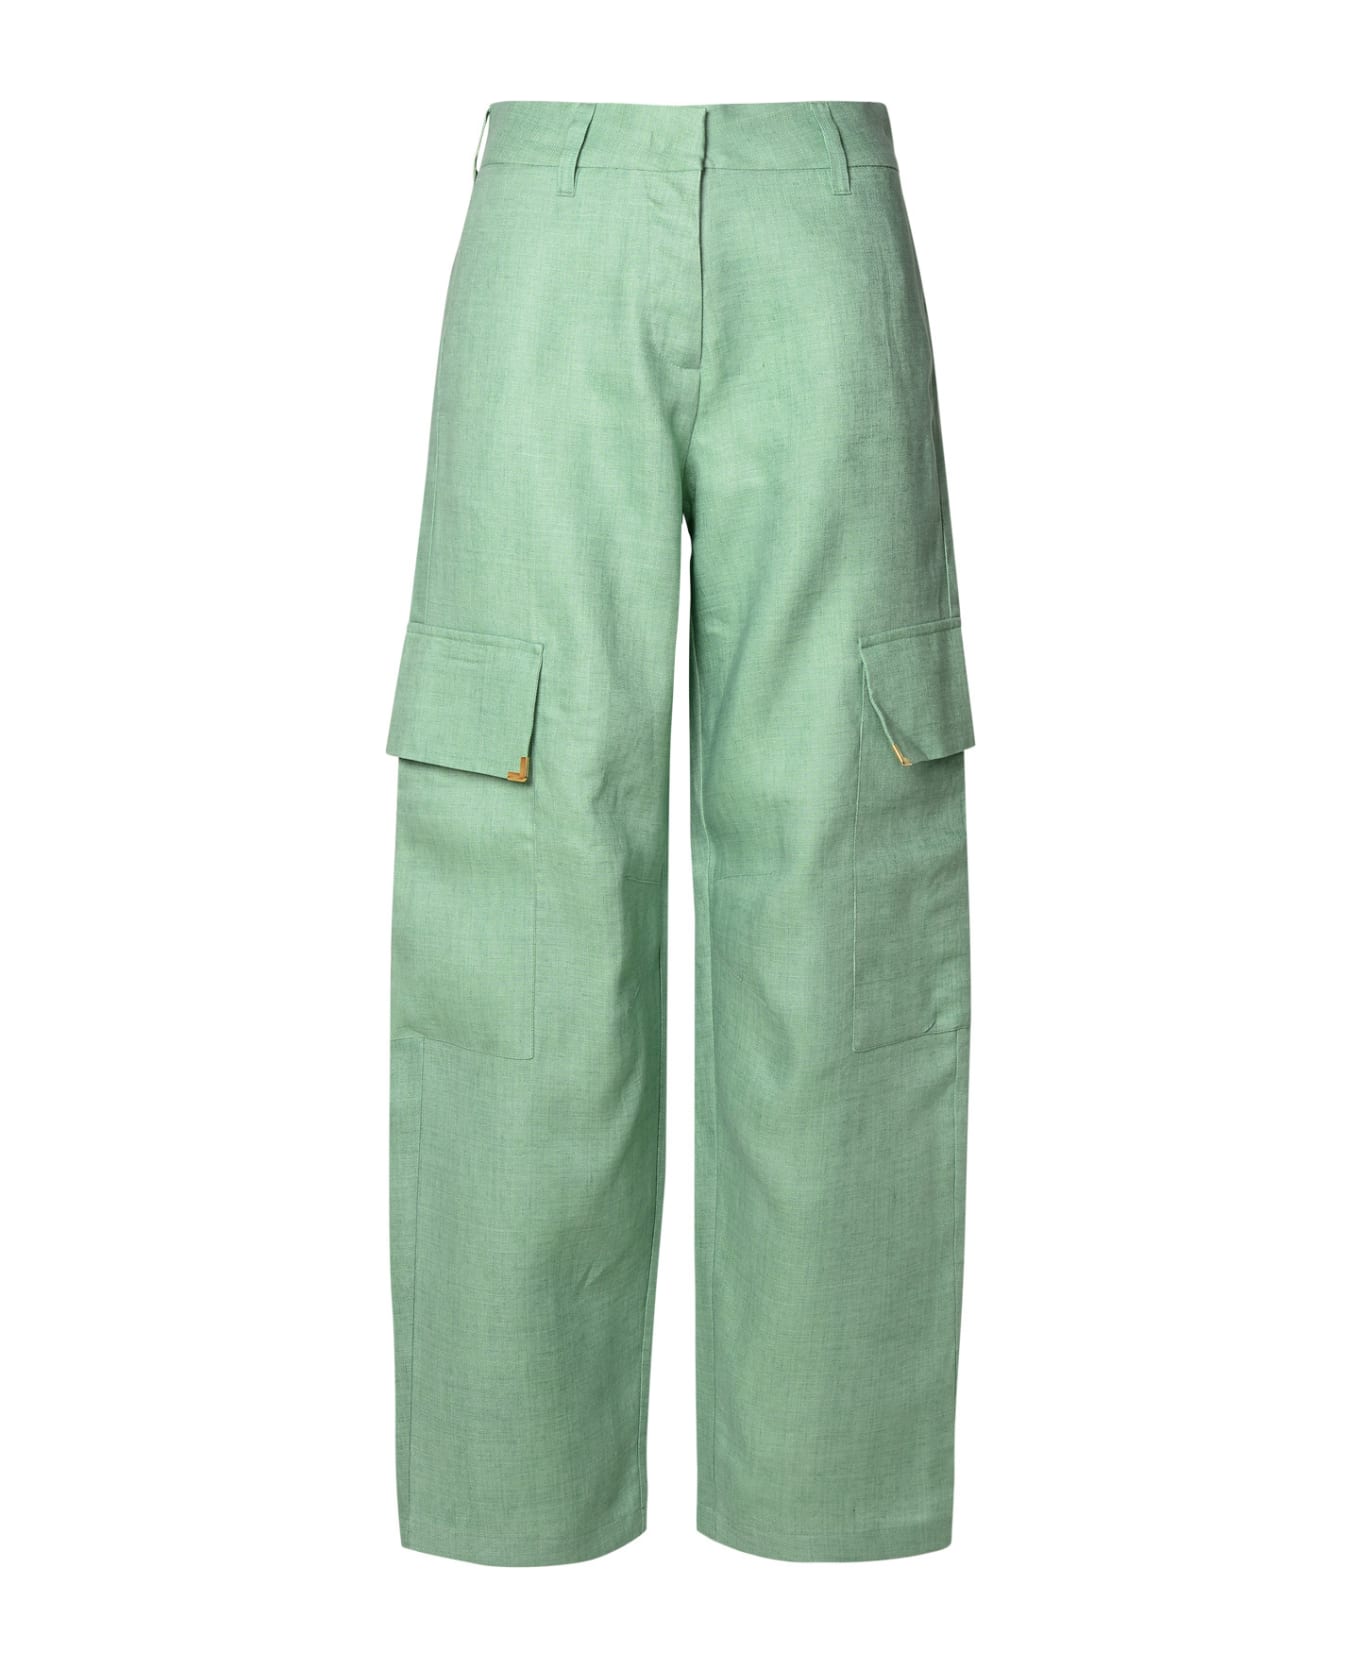 Palm Angels Cargo Pants - Green ボトムス